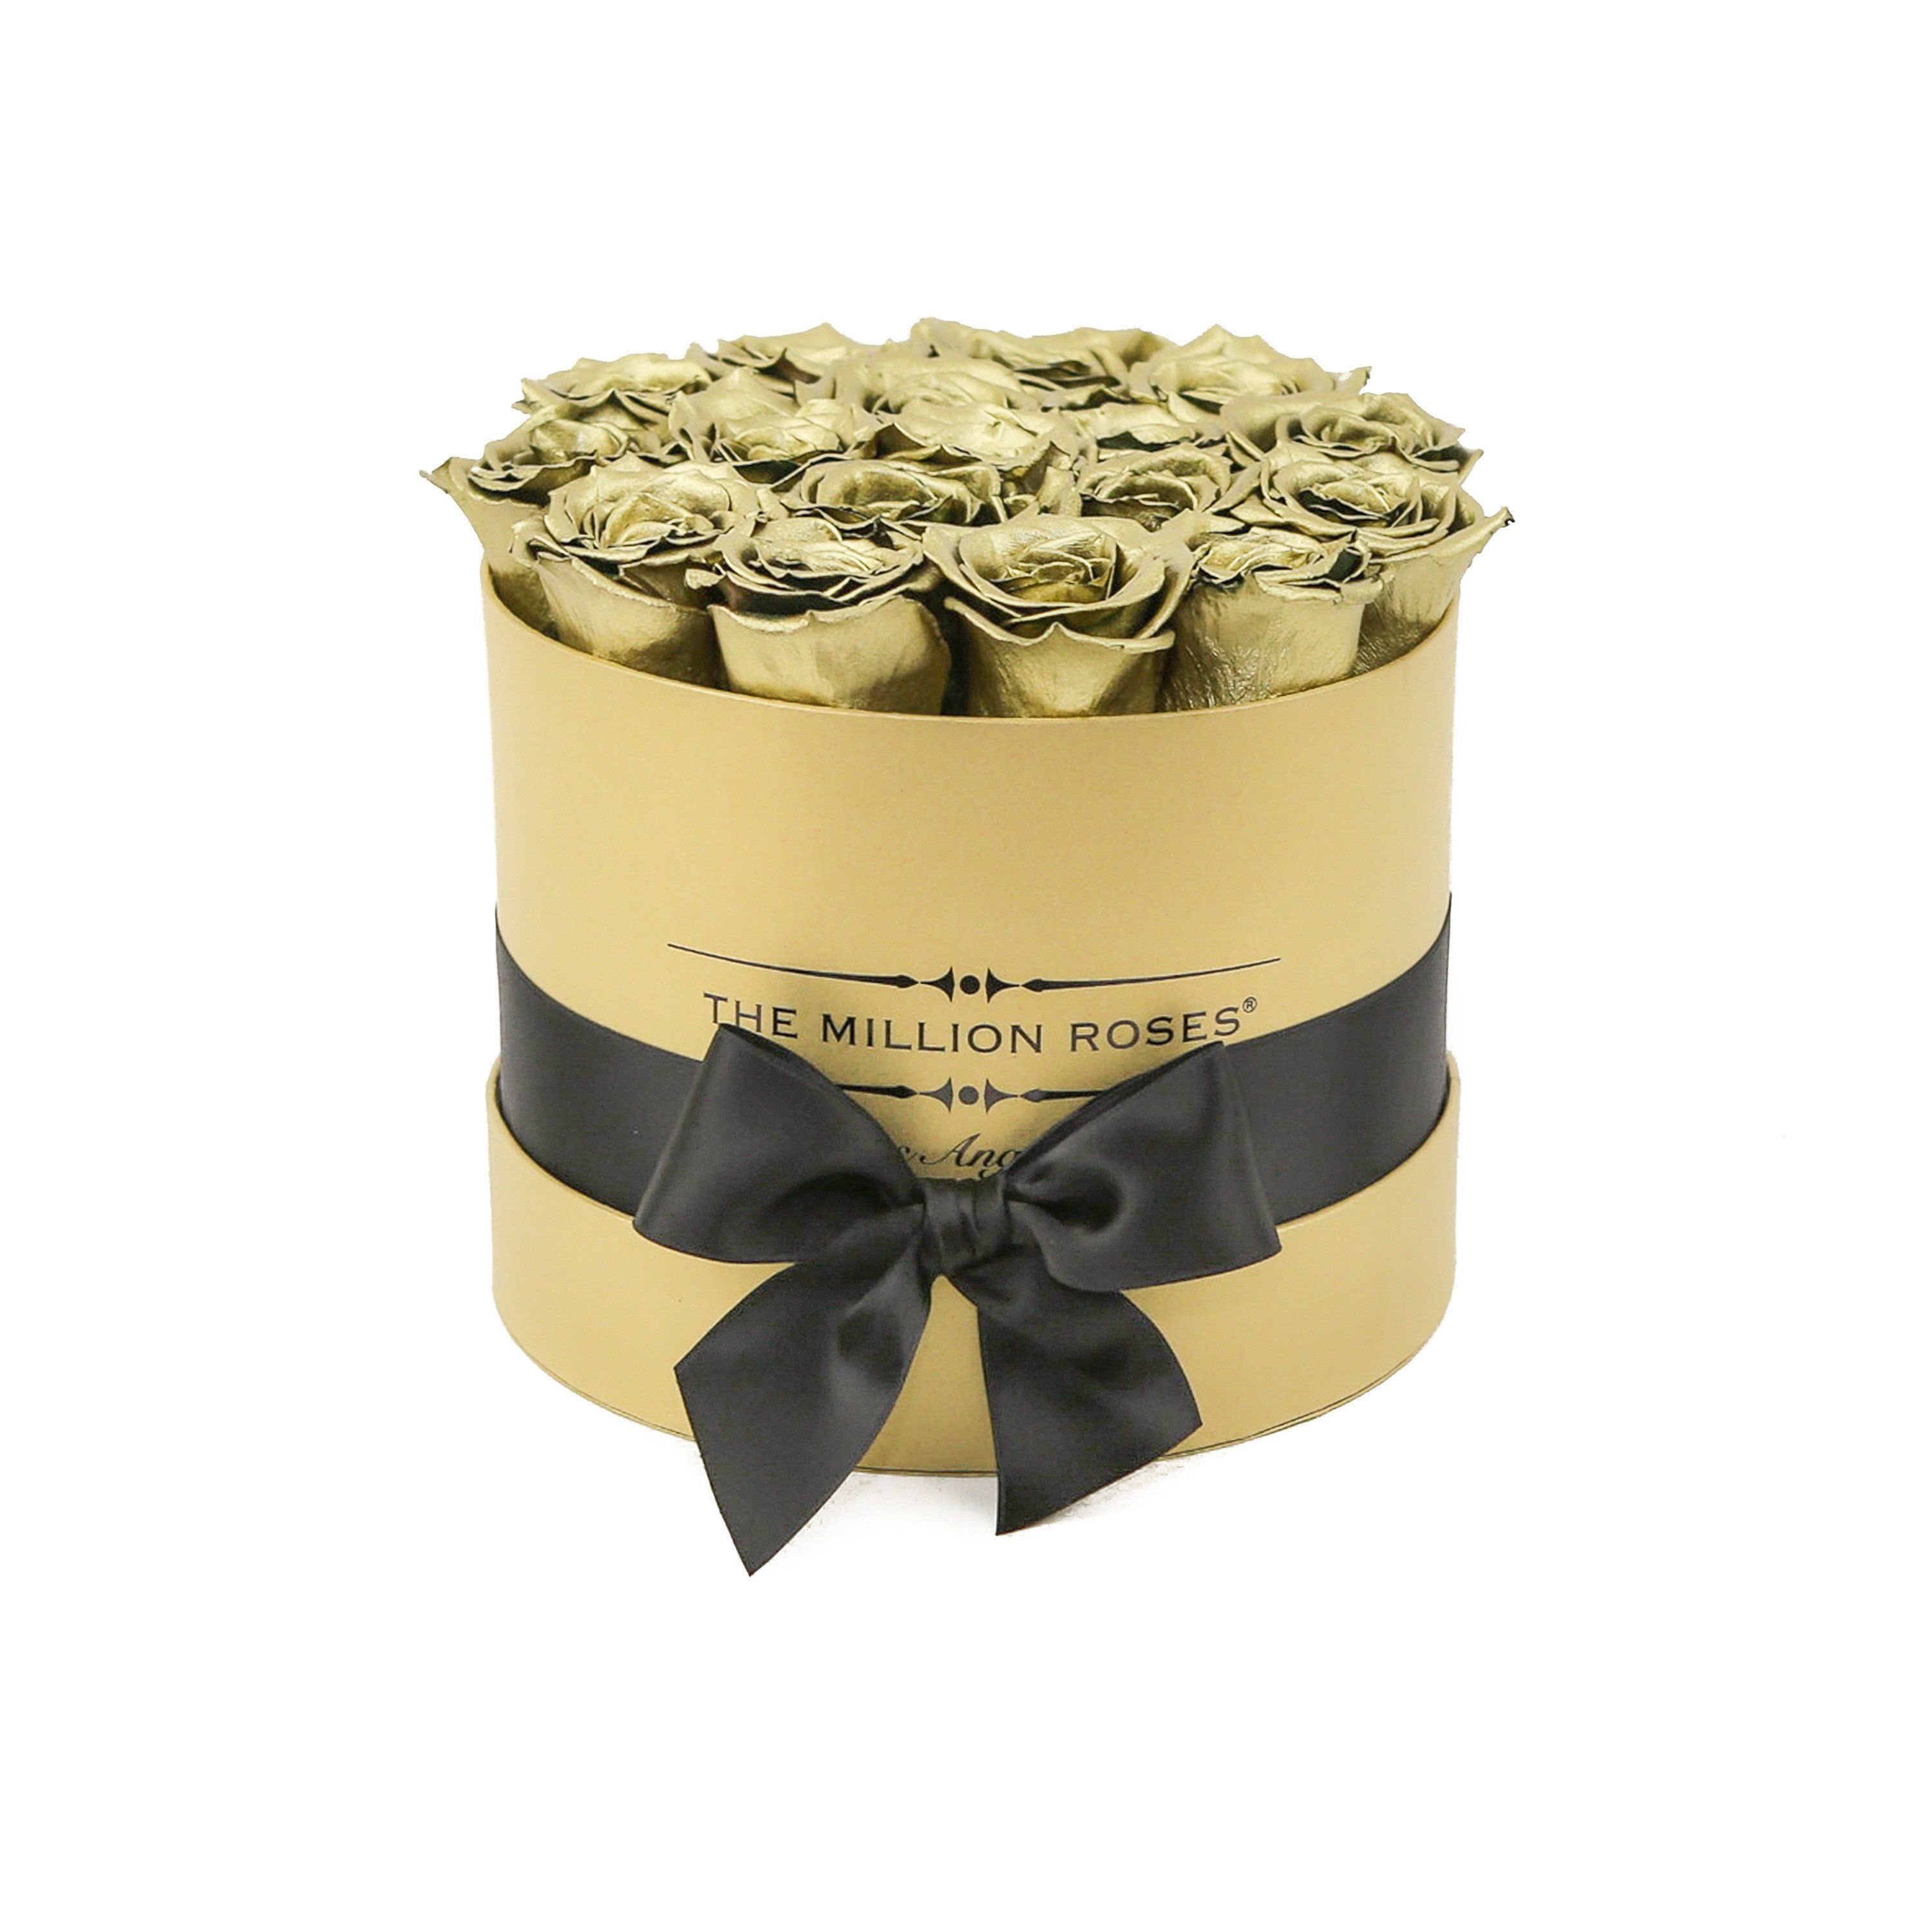 classic round box - gold - olive-gold roses gold eternity roses - the million roses